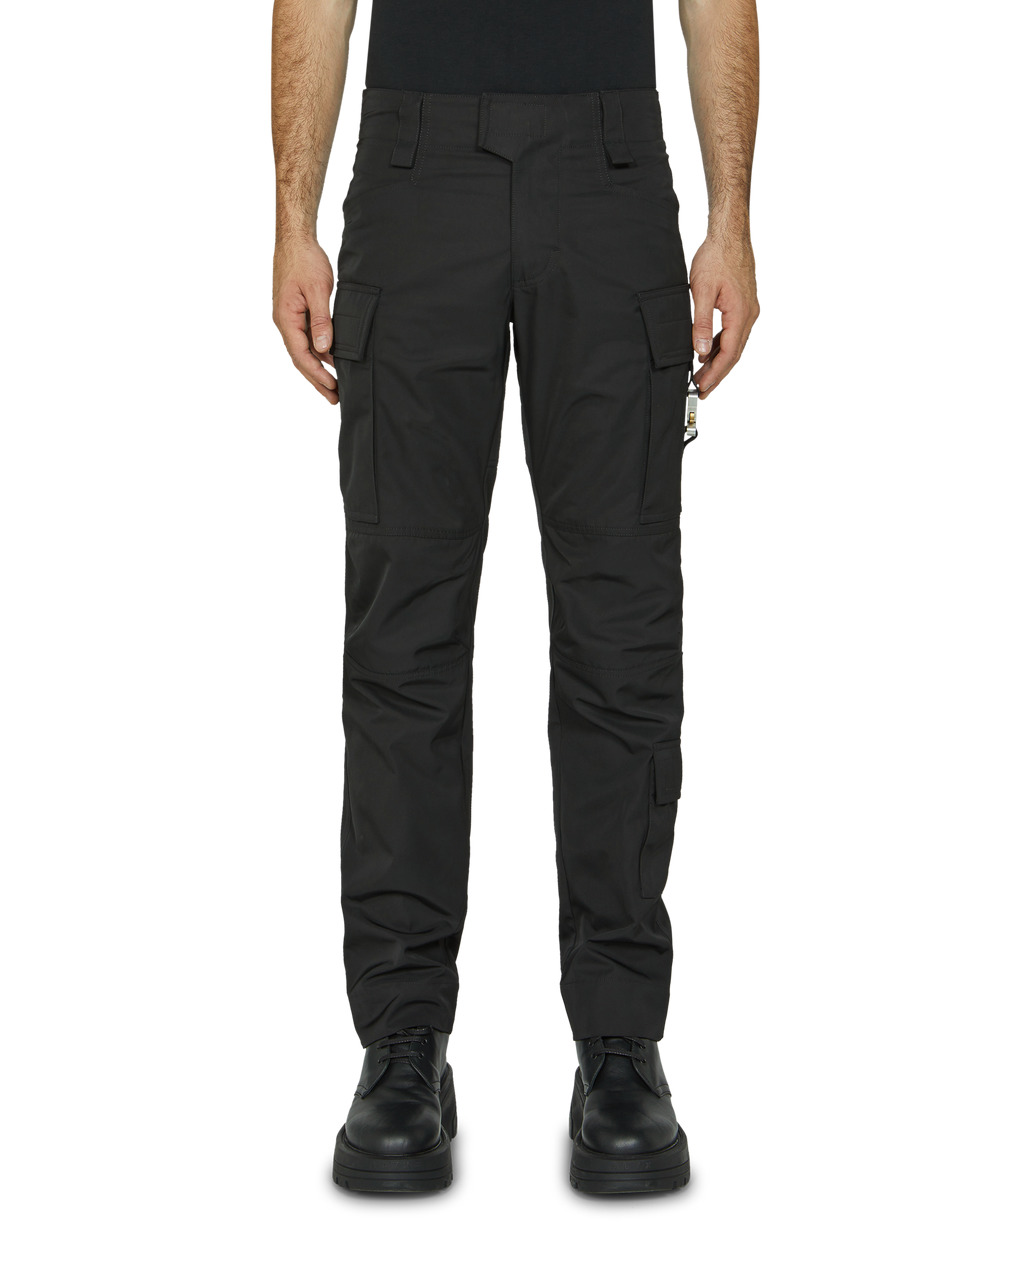 TACTICAL PANT WITH BUCKLE - 2